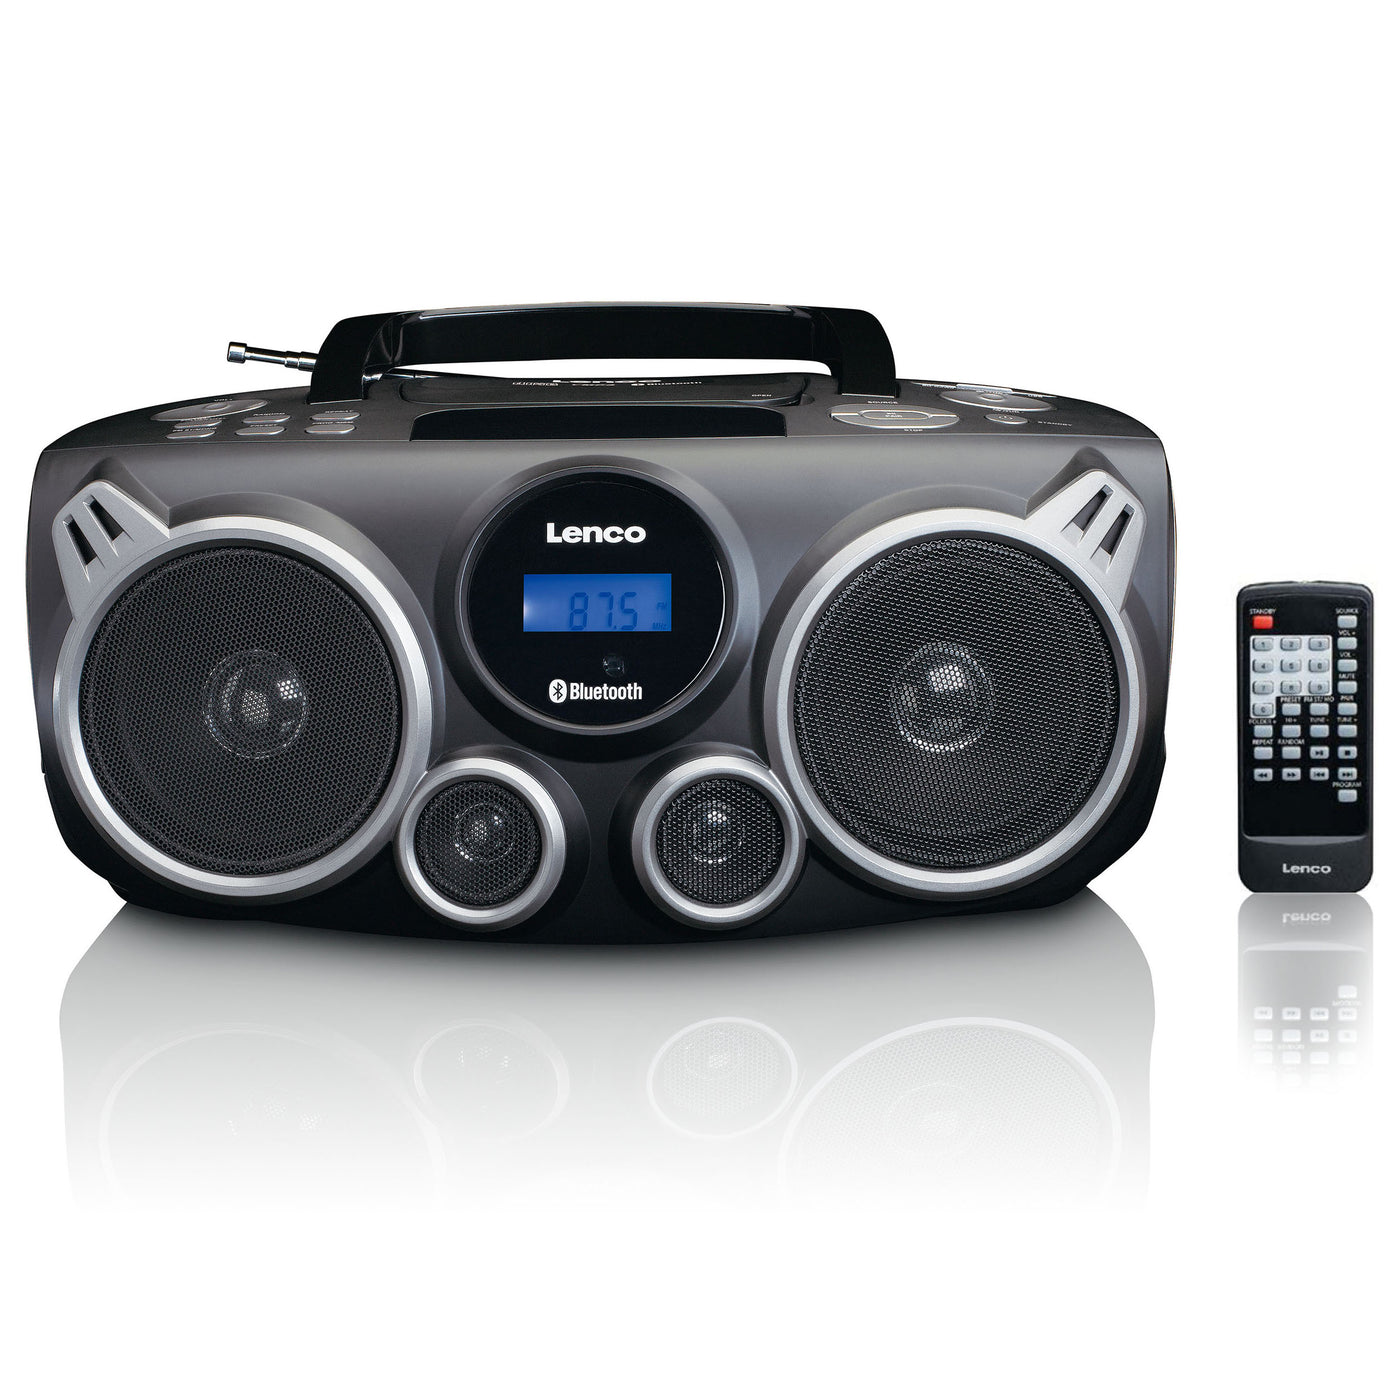 CD Player, DAB+ / DAB Radio, HiFi System, Portable Bluetooth Speaker, 10W  Fast Qi Wireless Charger, iPhone and Android, FM Radio, USB Port, MP3  Player